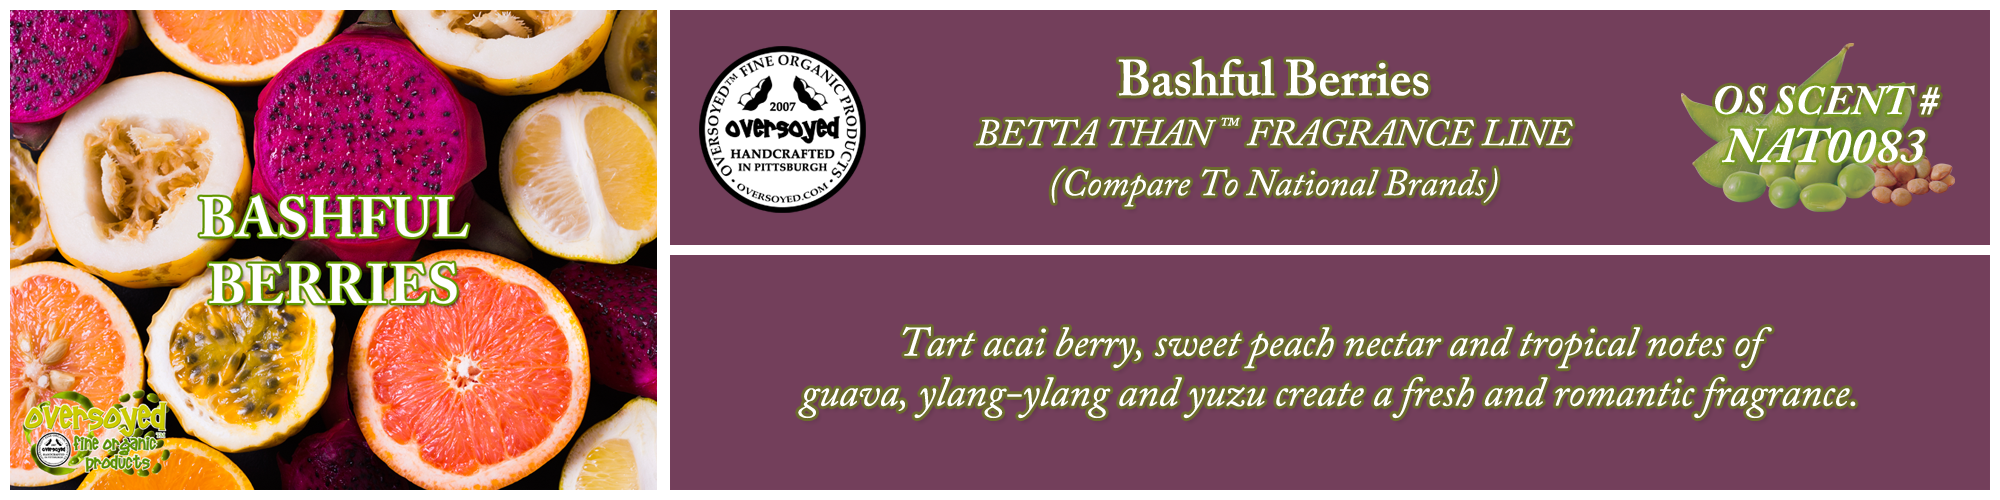 Bashful Berries Handcrafted Products Collection